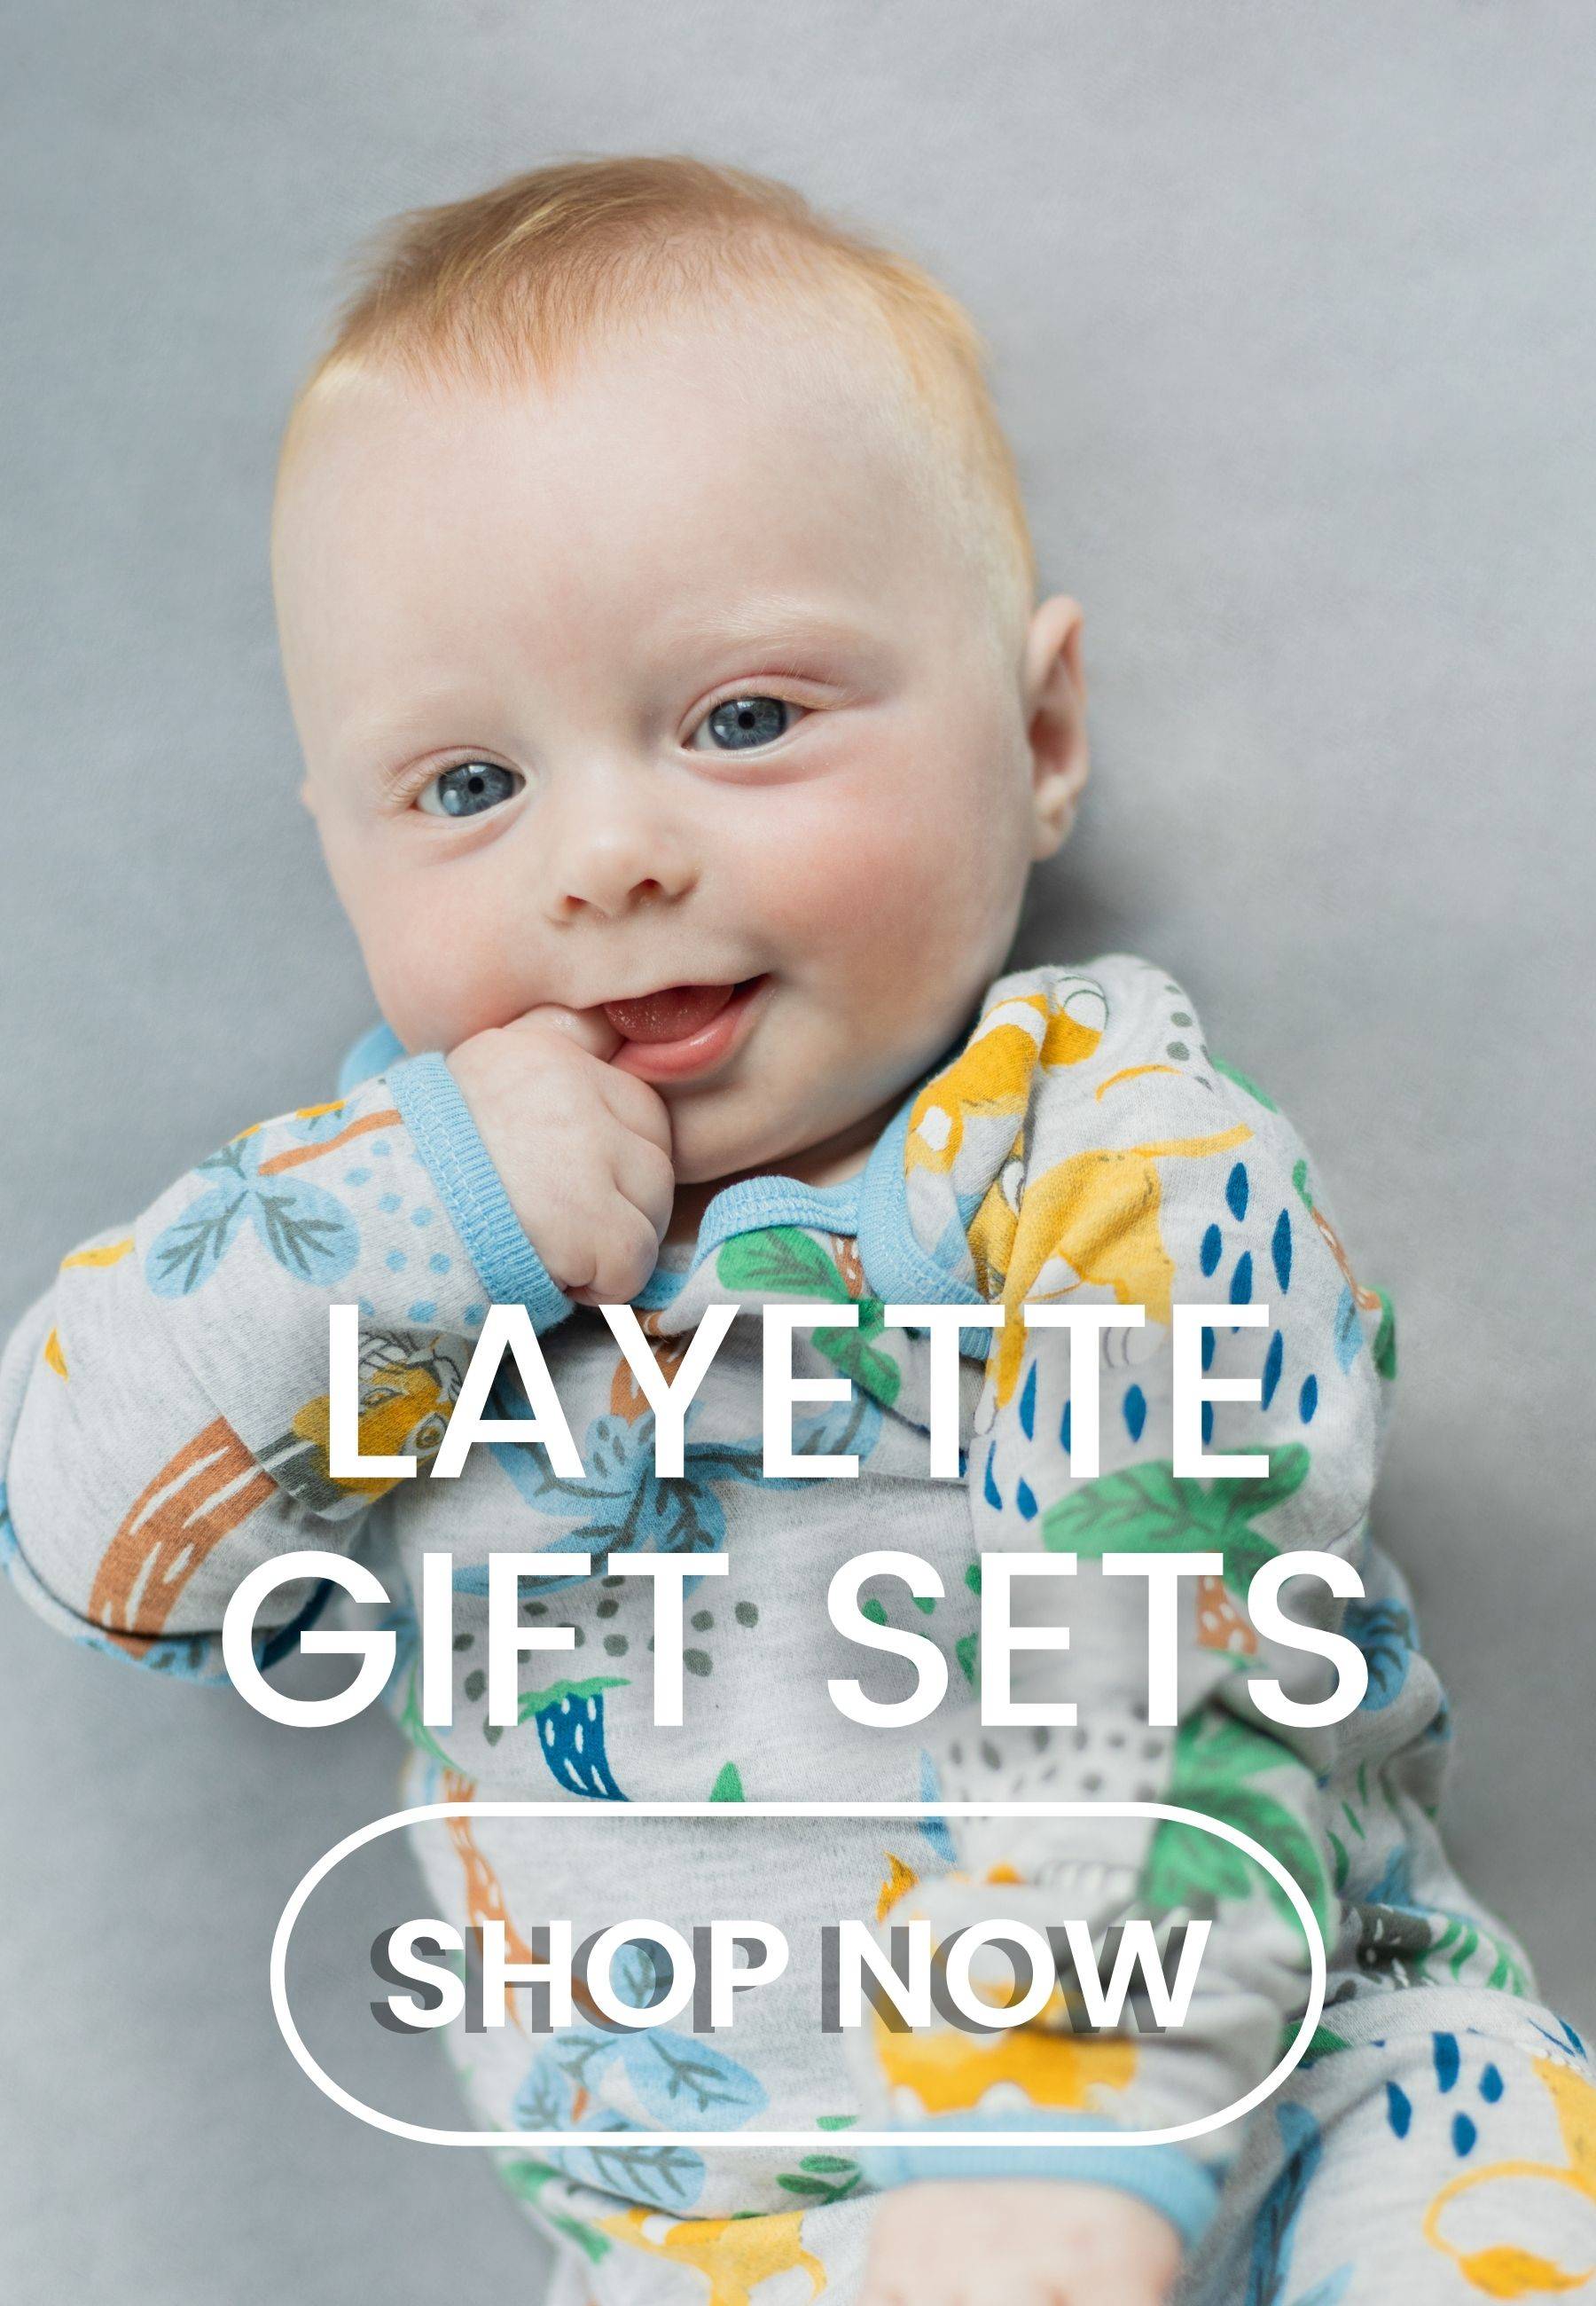 Layette Collection